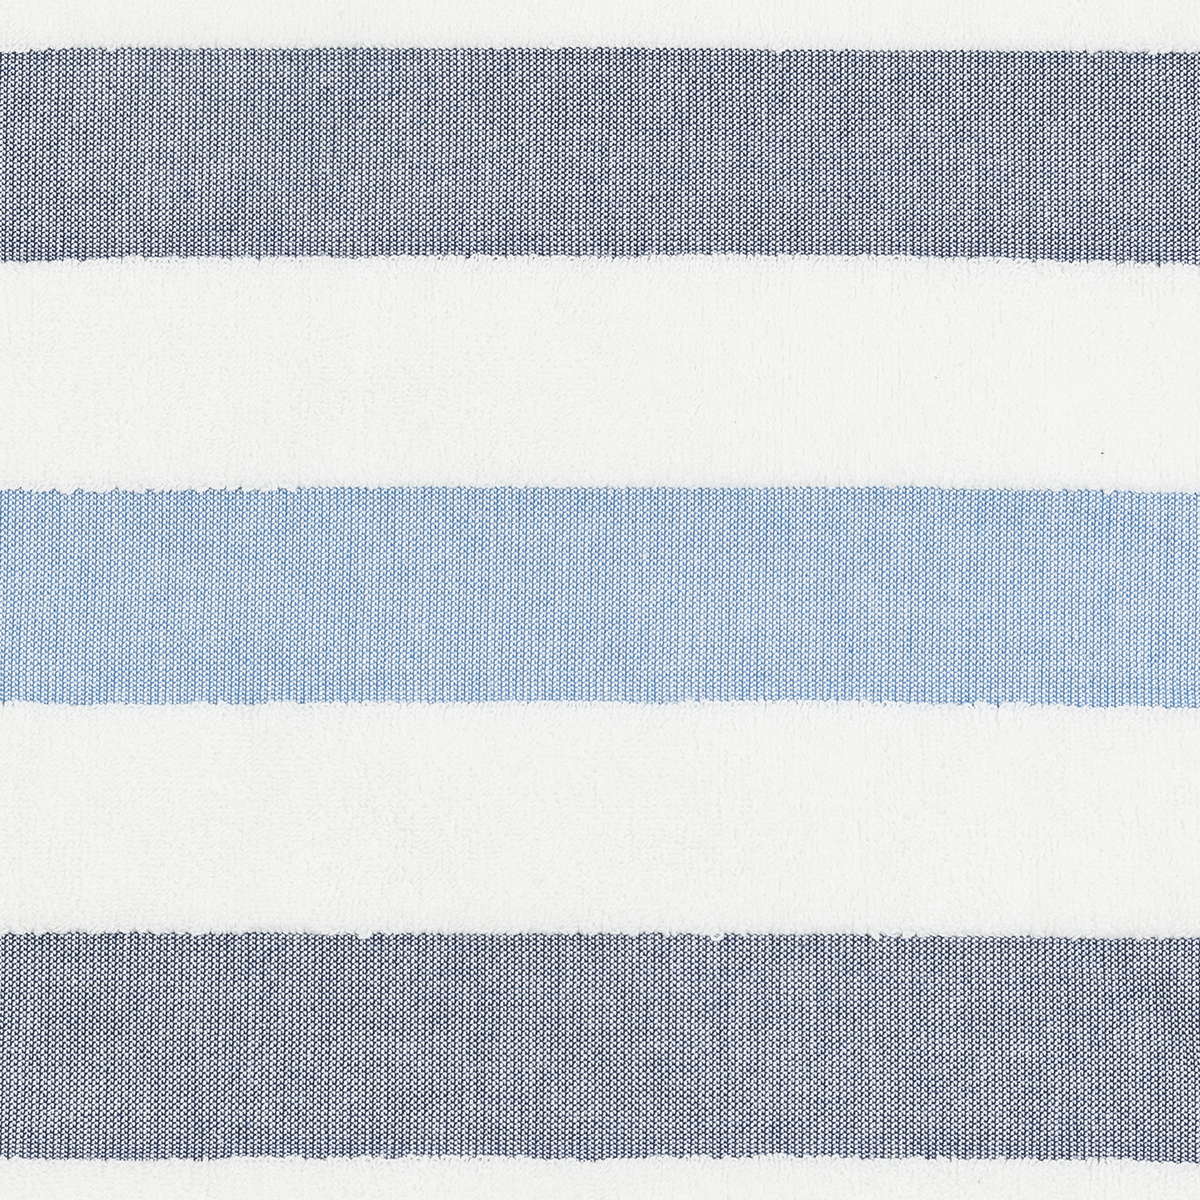 Swatch Sample of Matouk Amado Pool and Beach Towels in Sailor Stripe Color